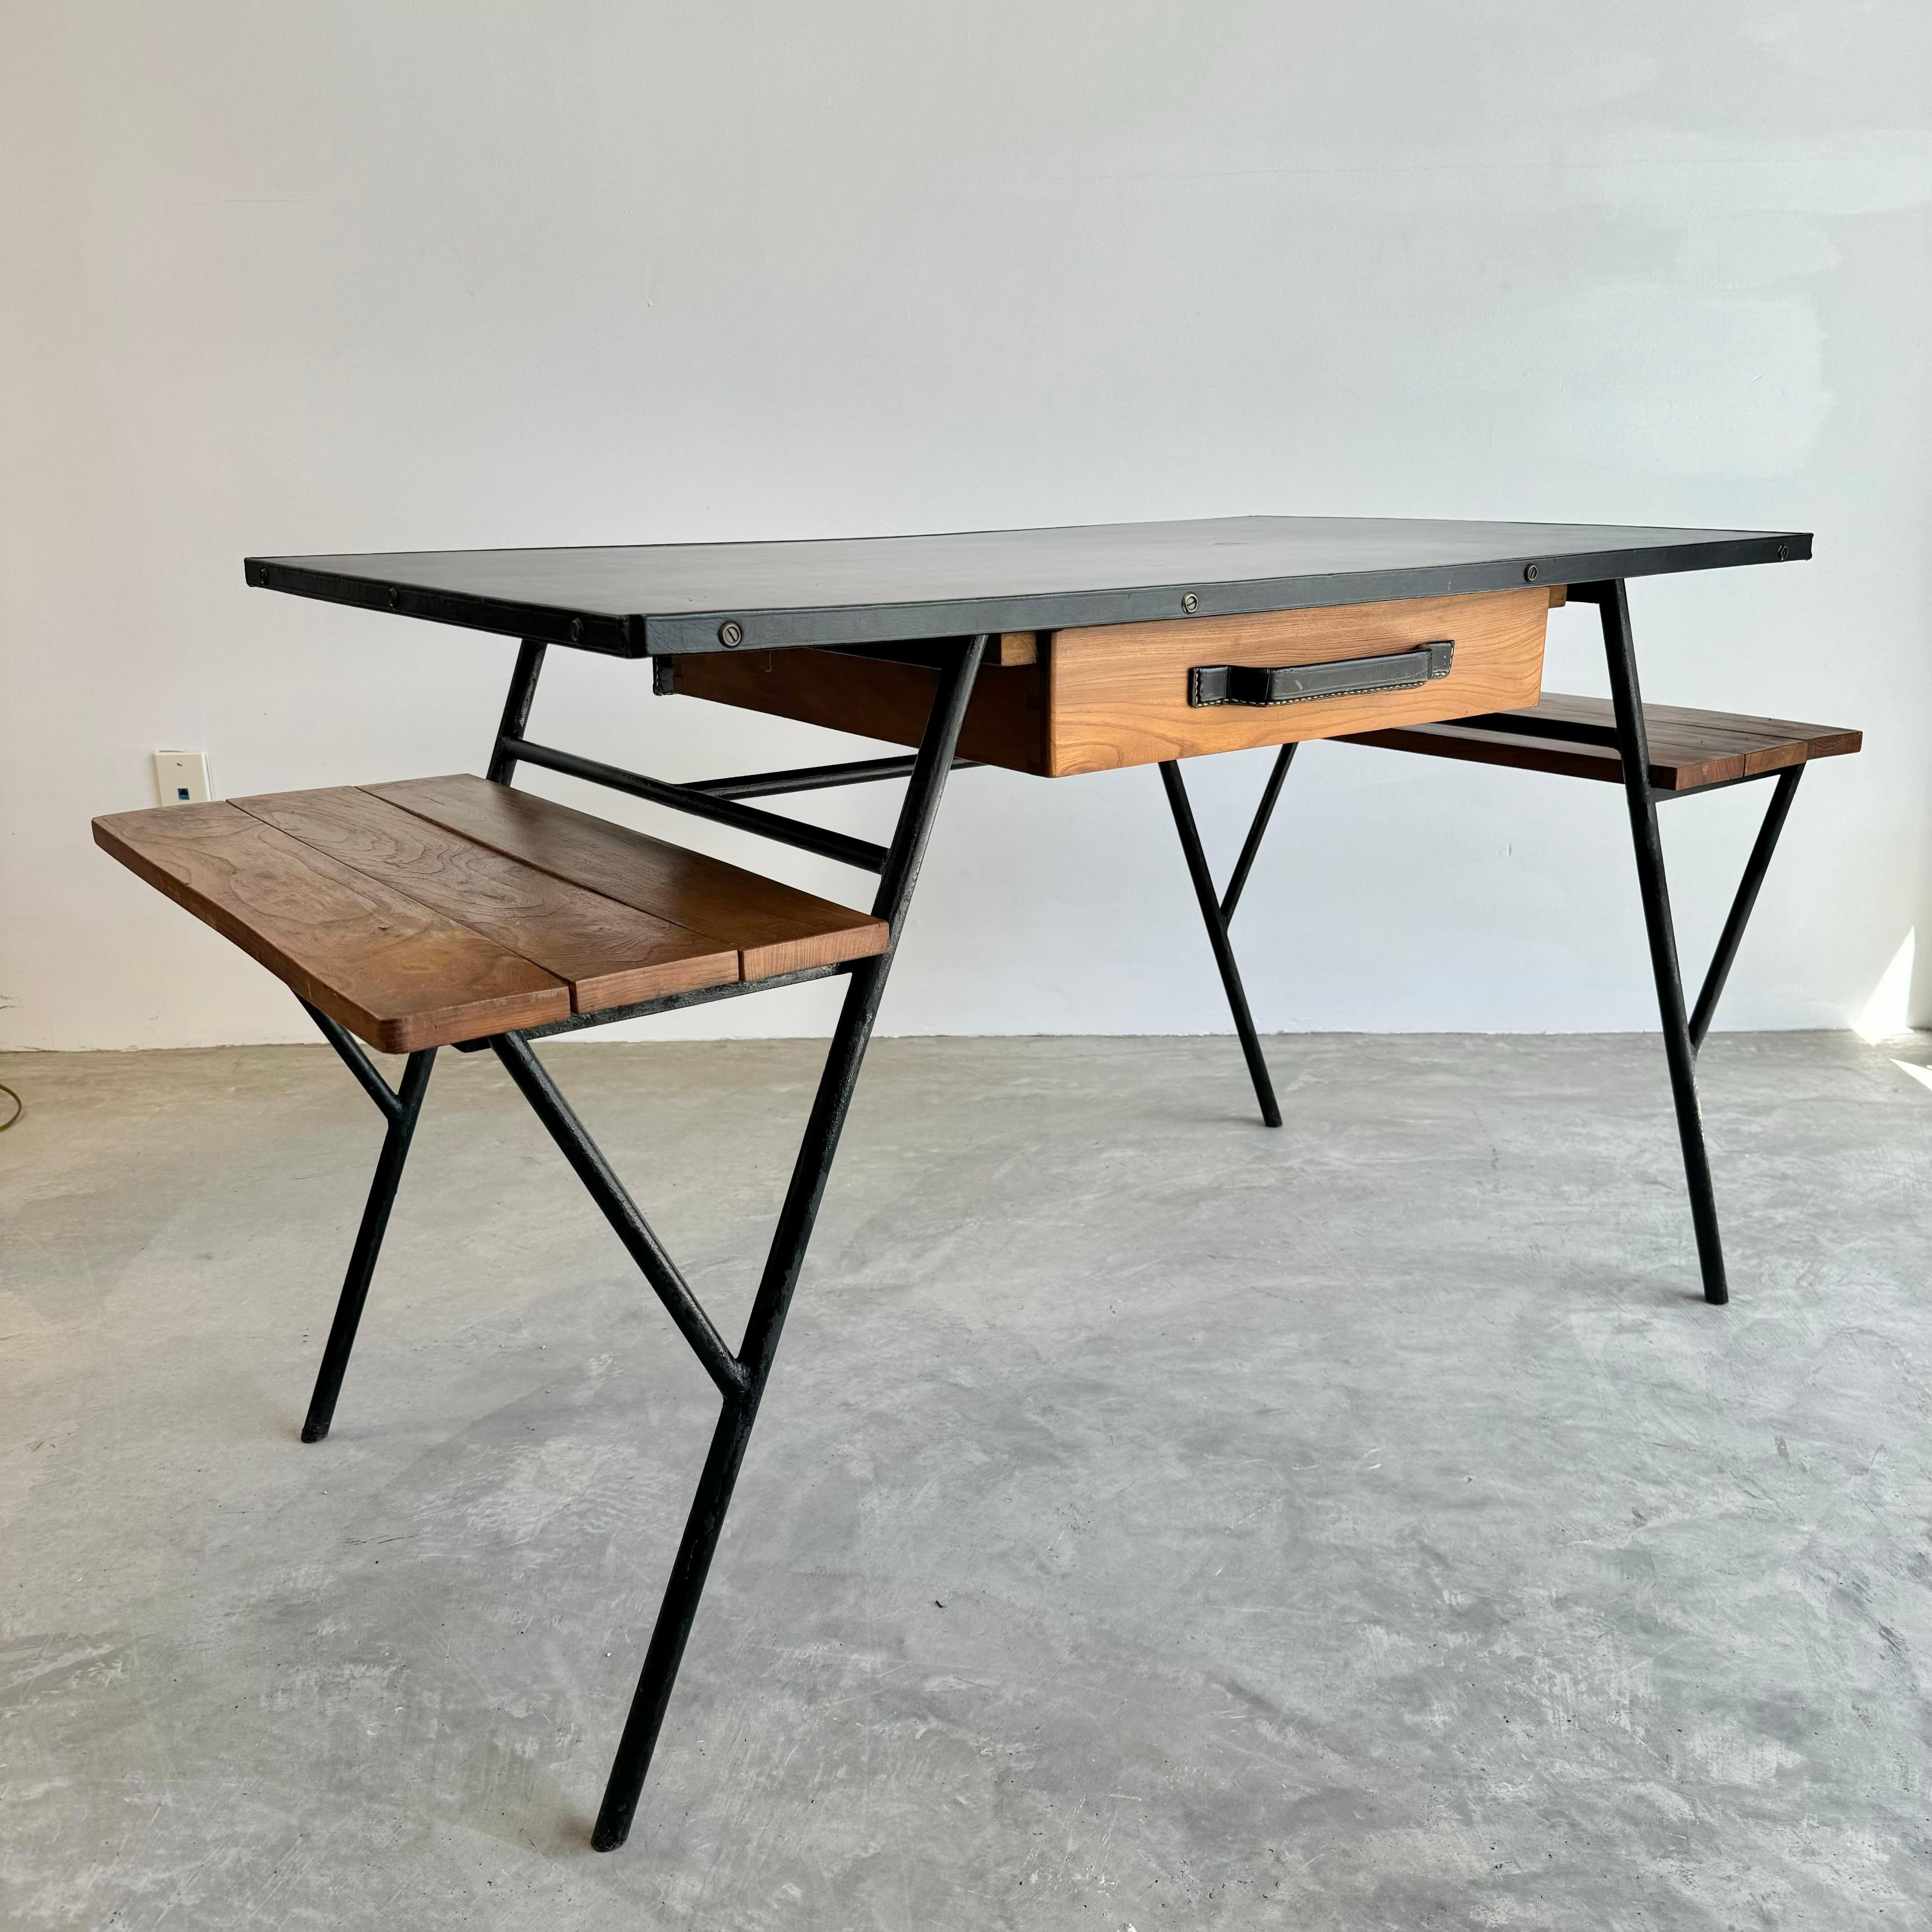 Hand-Crafted Jacques Adnet Iron and Oak Desk, 1950s France For Sale